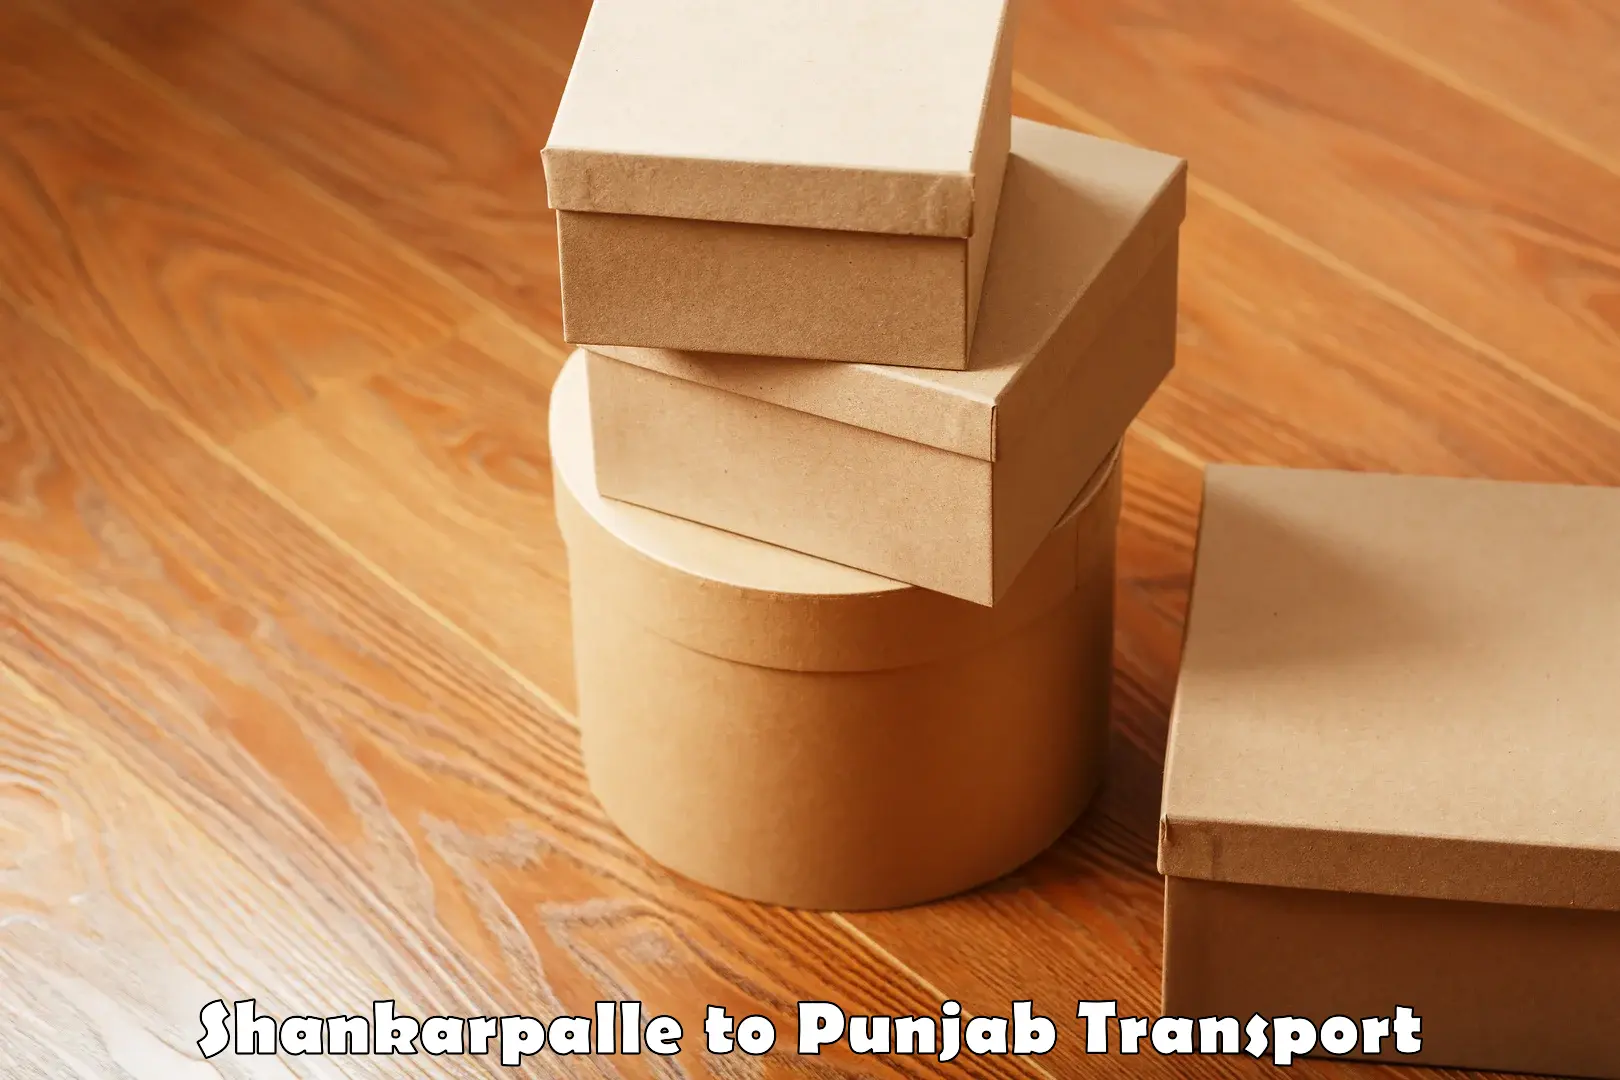 Delivery service Shankarpalle to Punjab